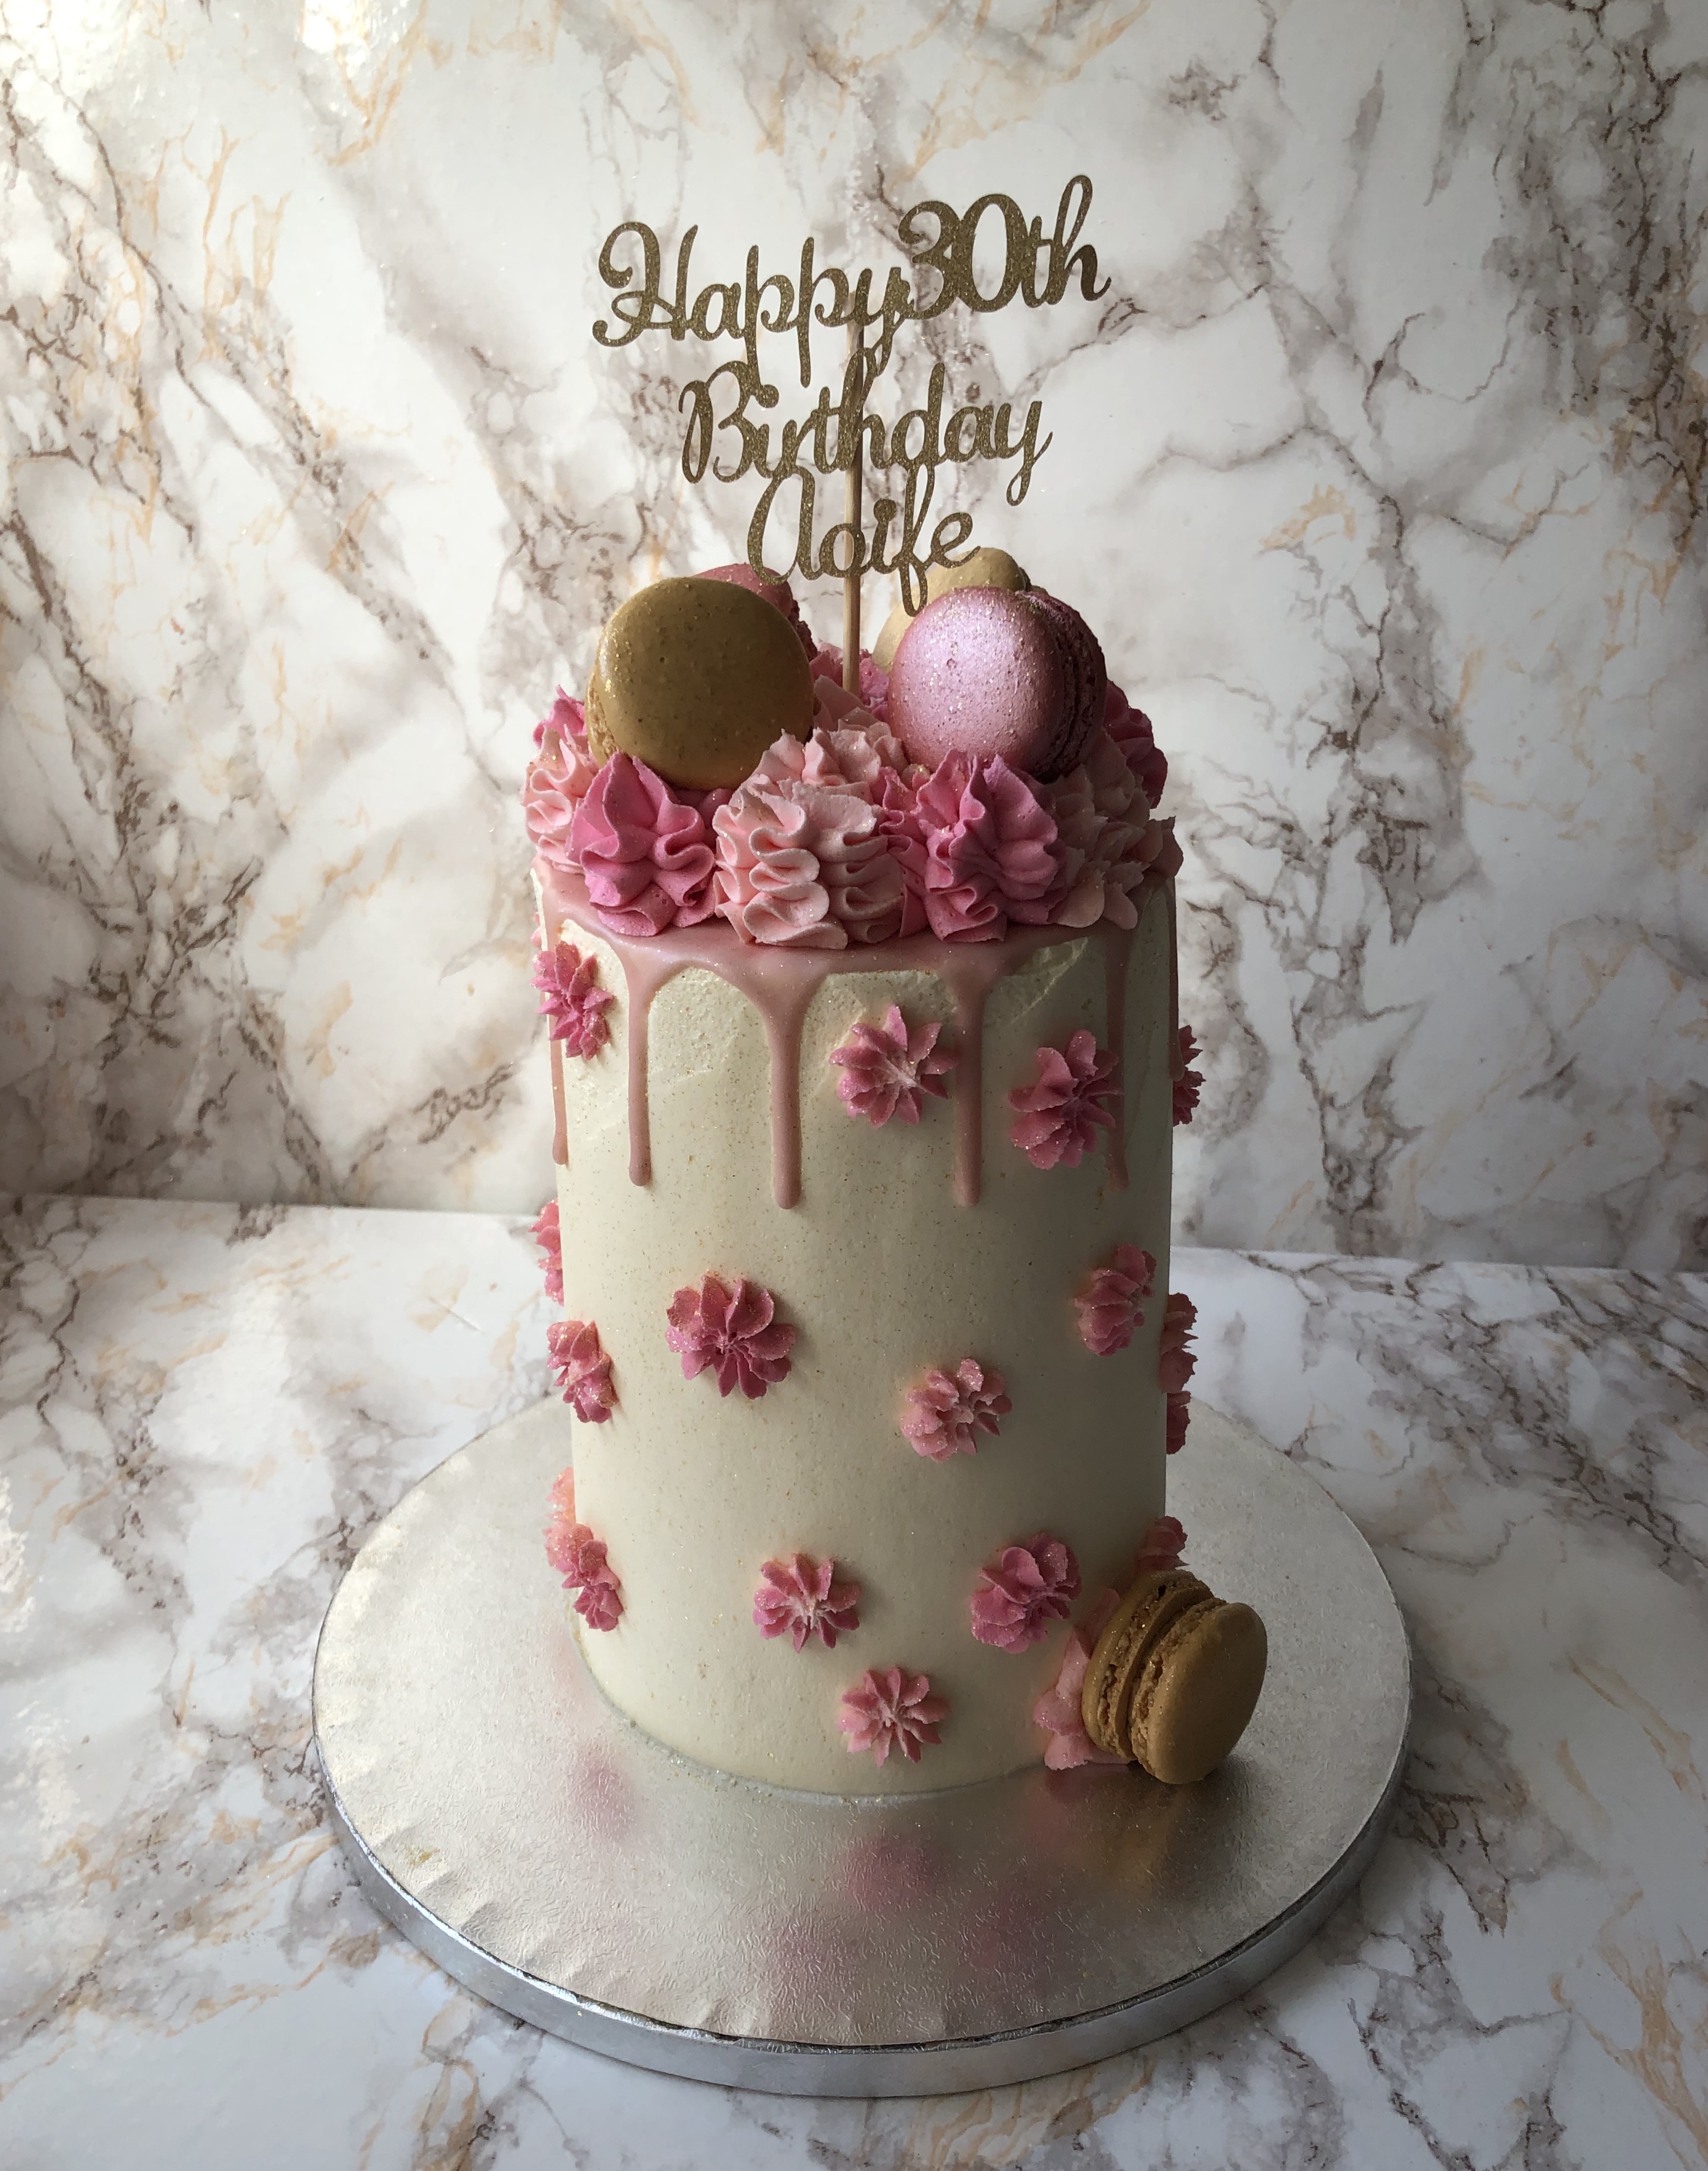 Fancy Birthday Cake for Baby Girl with Name - eNamePic